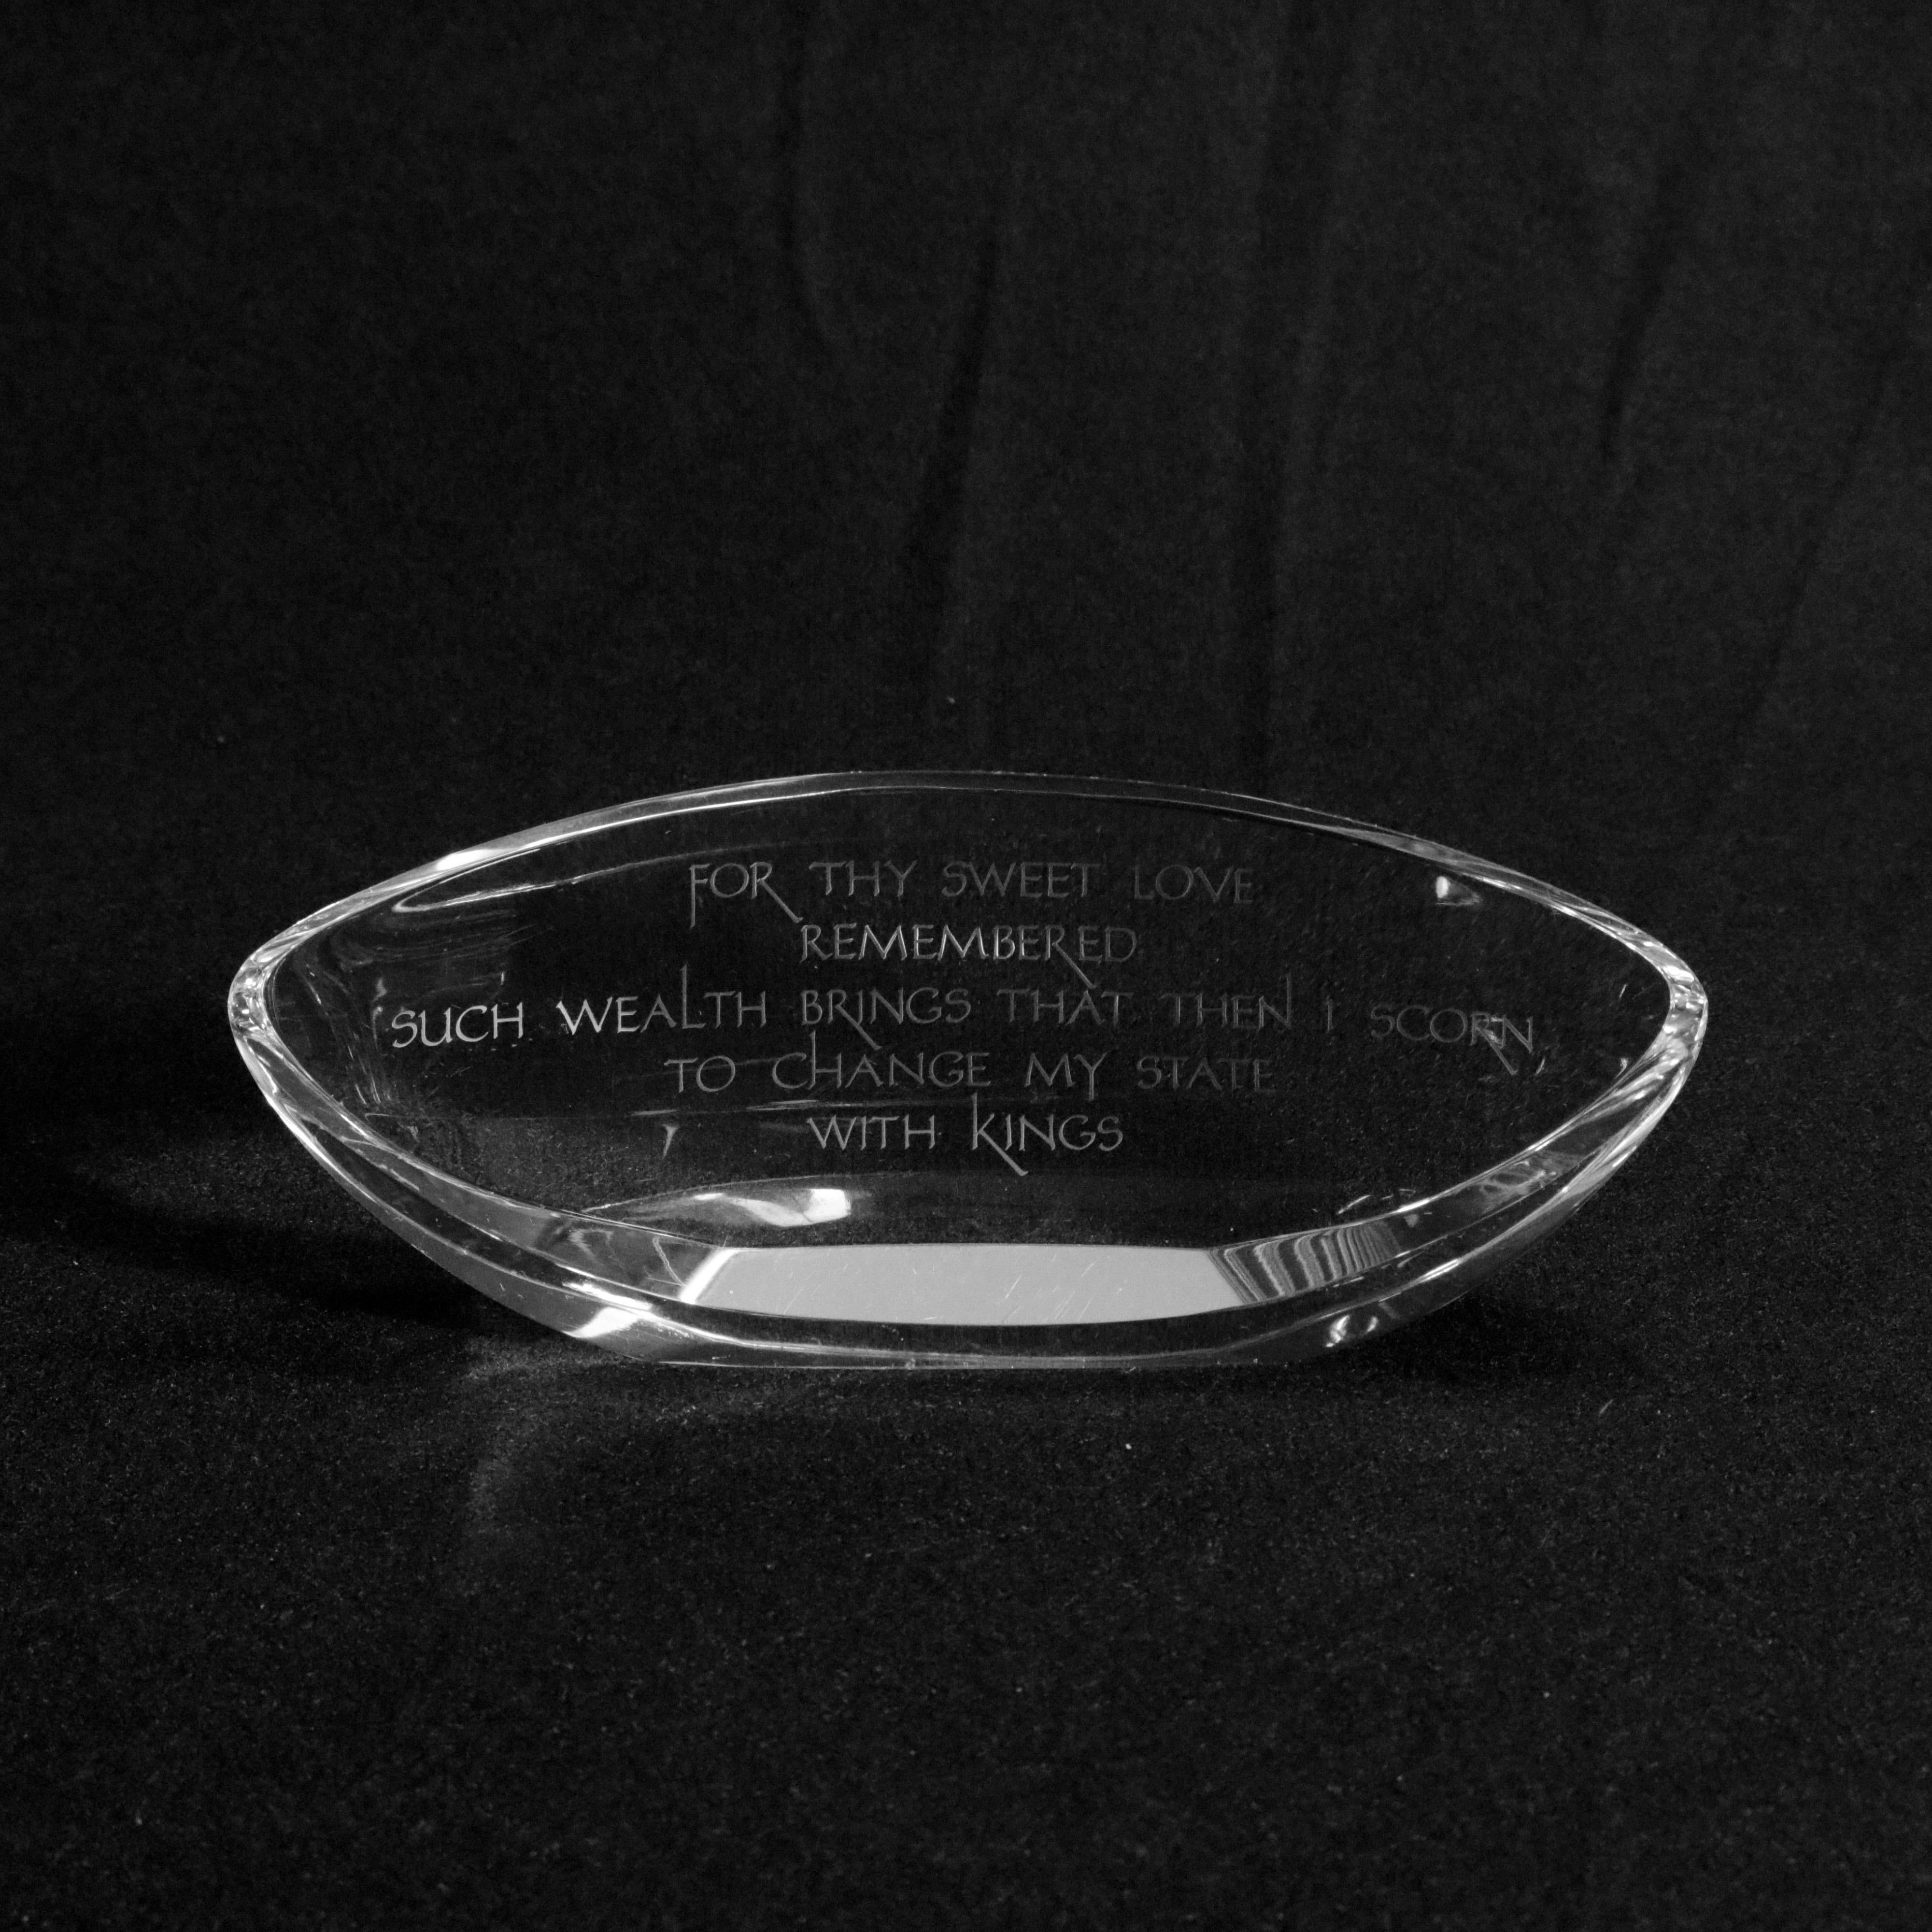 An art glass paperweight by Steuben offers inscription by William Shakespeare Sonnet 29: 